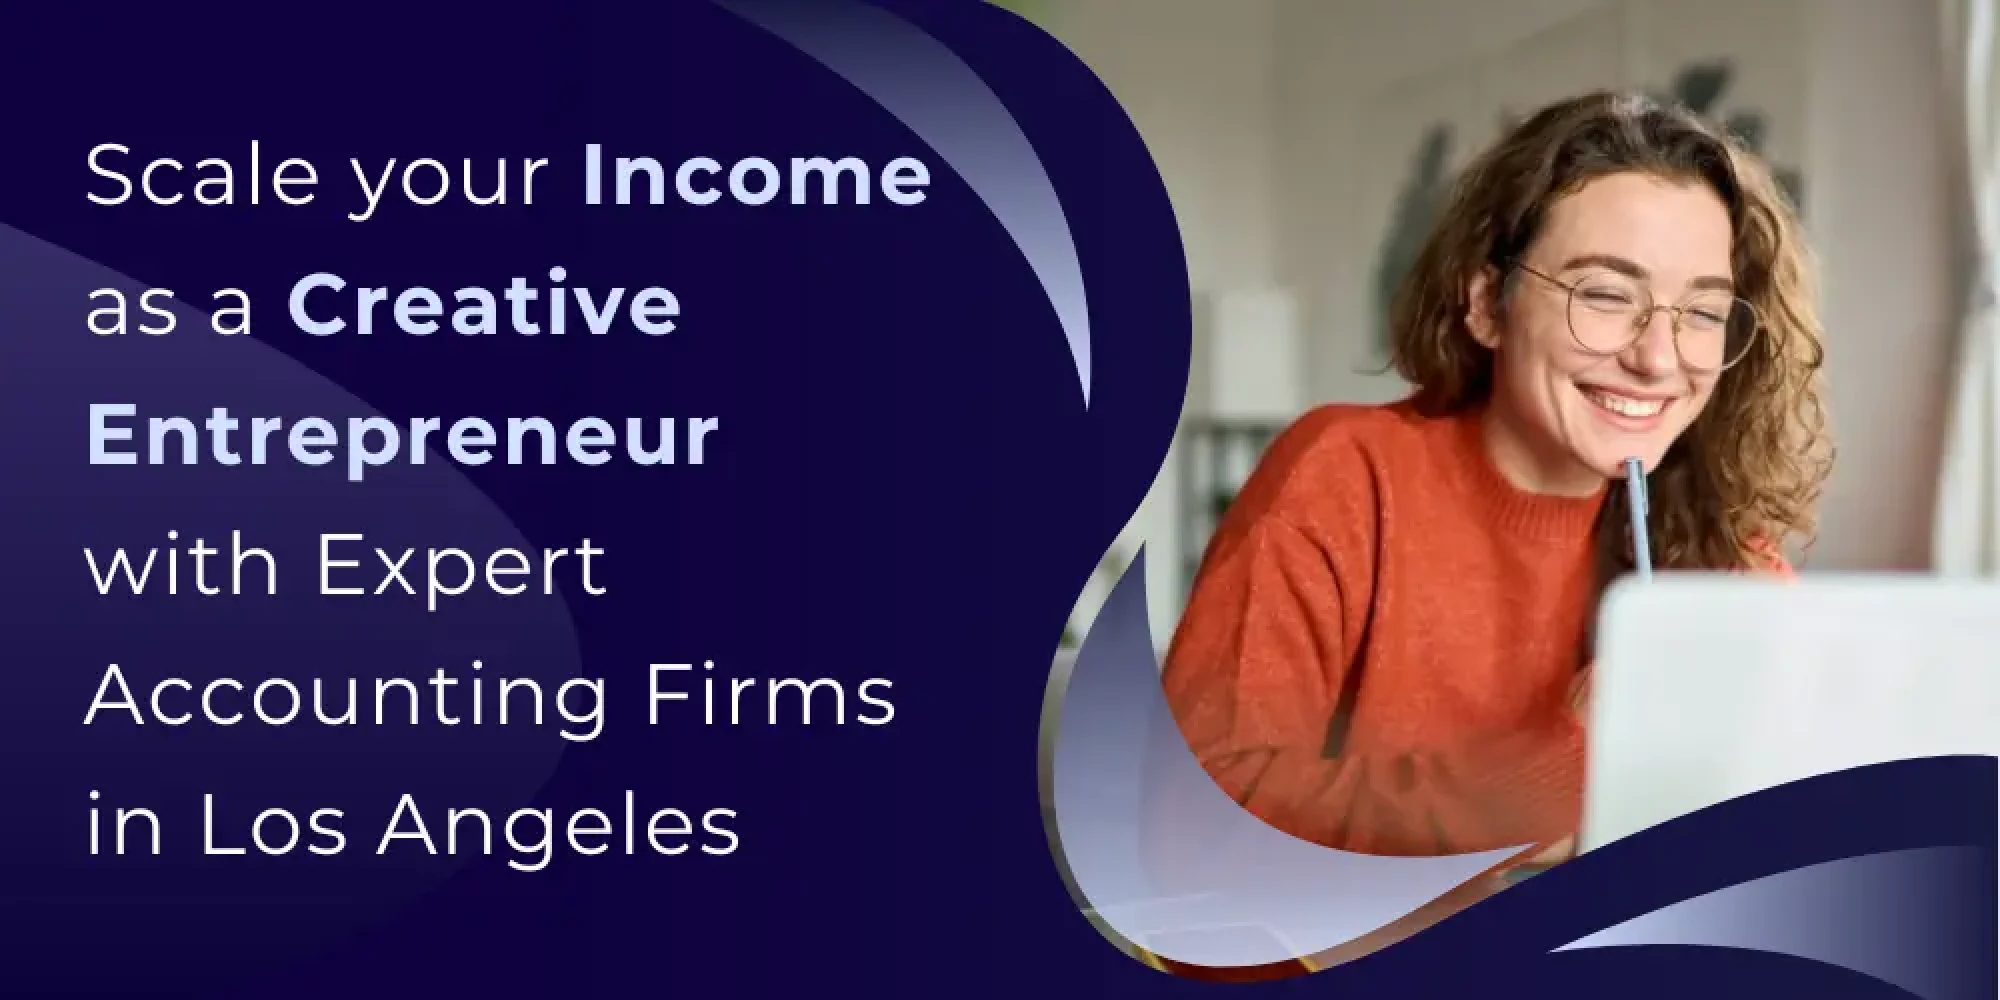 Scale your Income as a Creative Entrepreneur with Expert Accounting Firms in Los Angeles